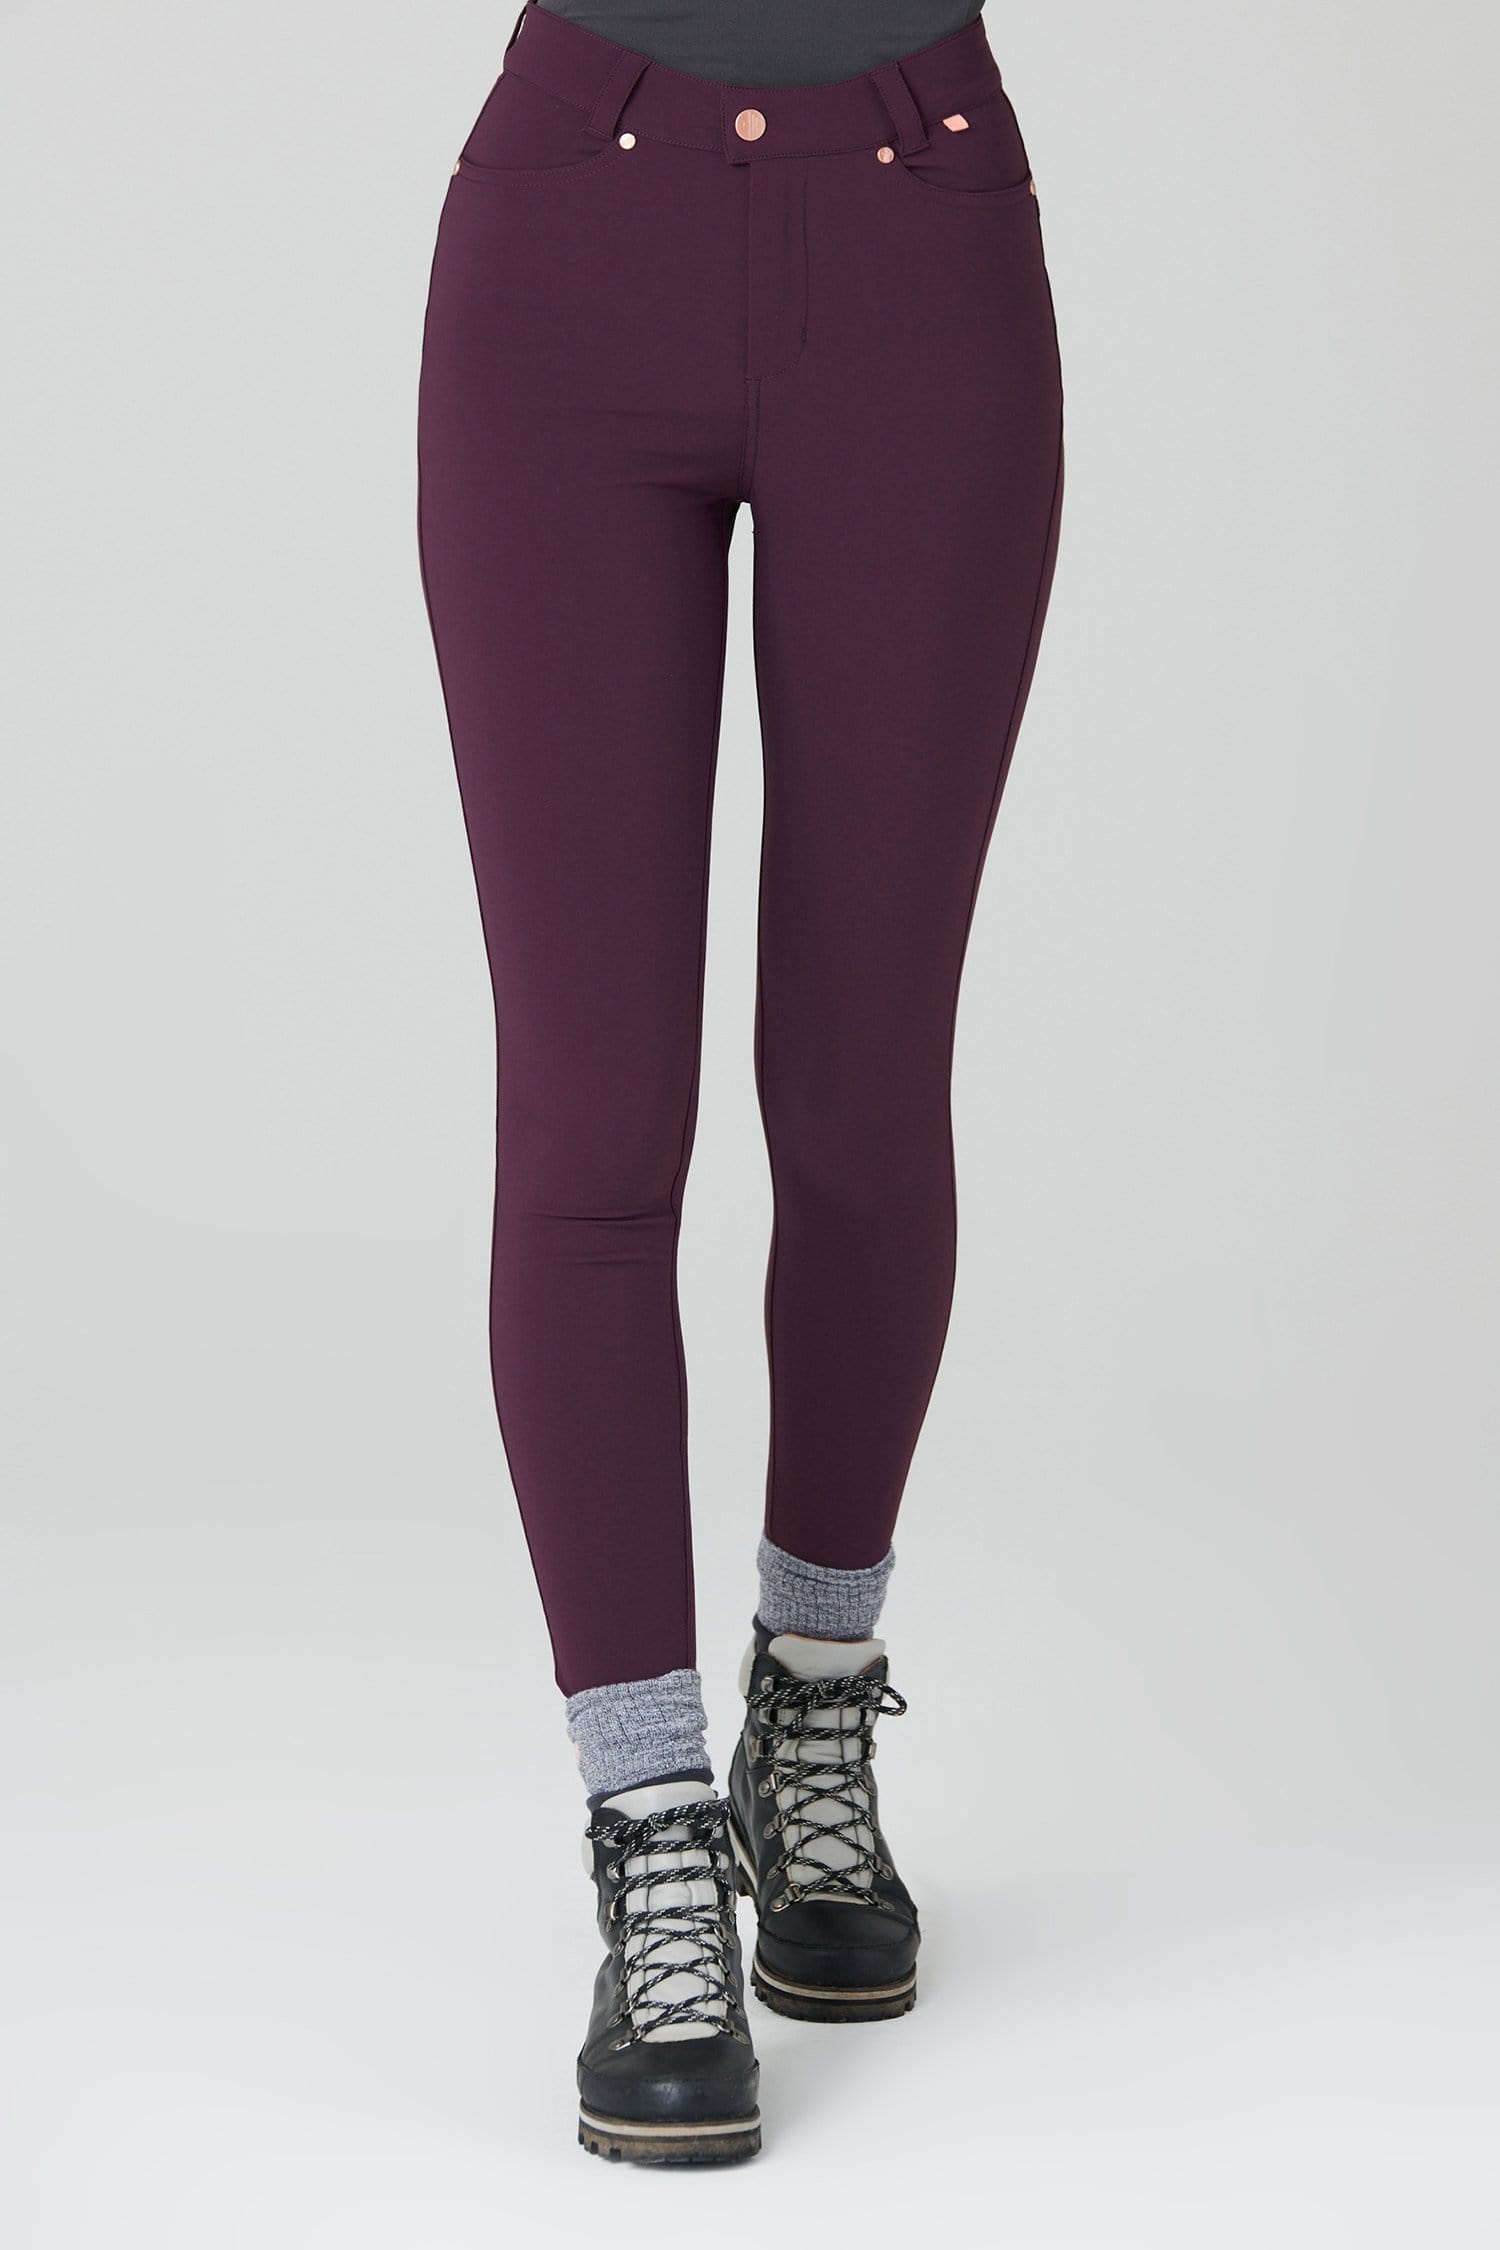 Max Stretch Skinny Outdoor Trousers - Aubergine - 24p / Uk6 - Womens - Acai Outdoorwear